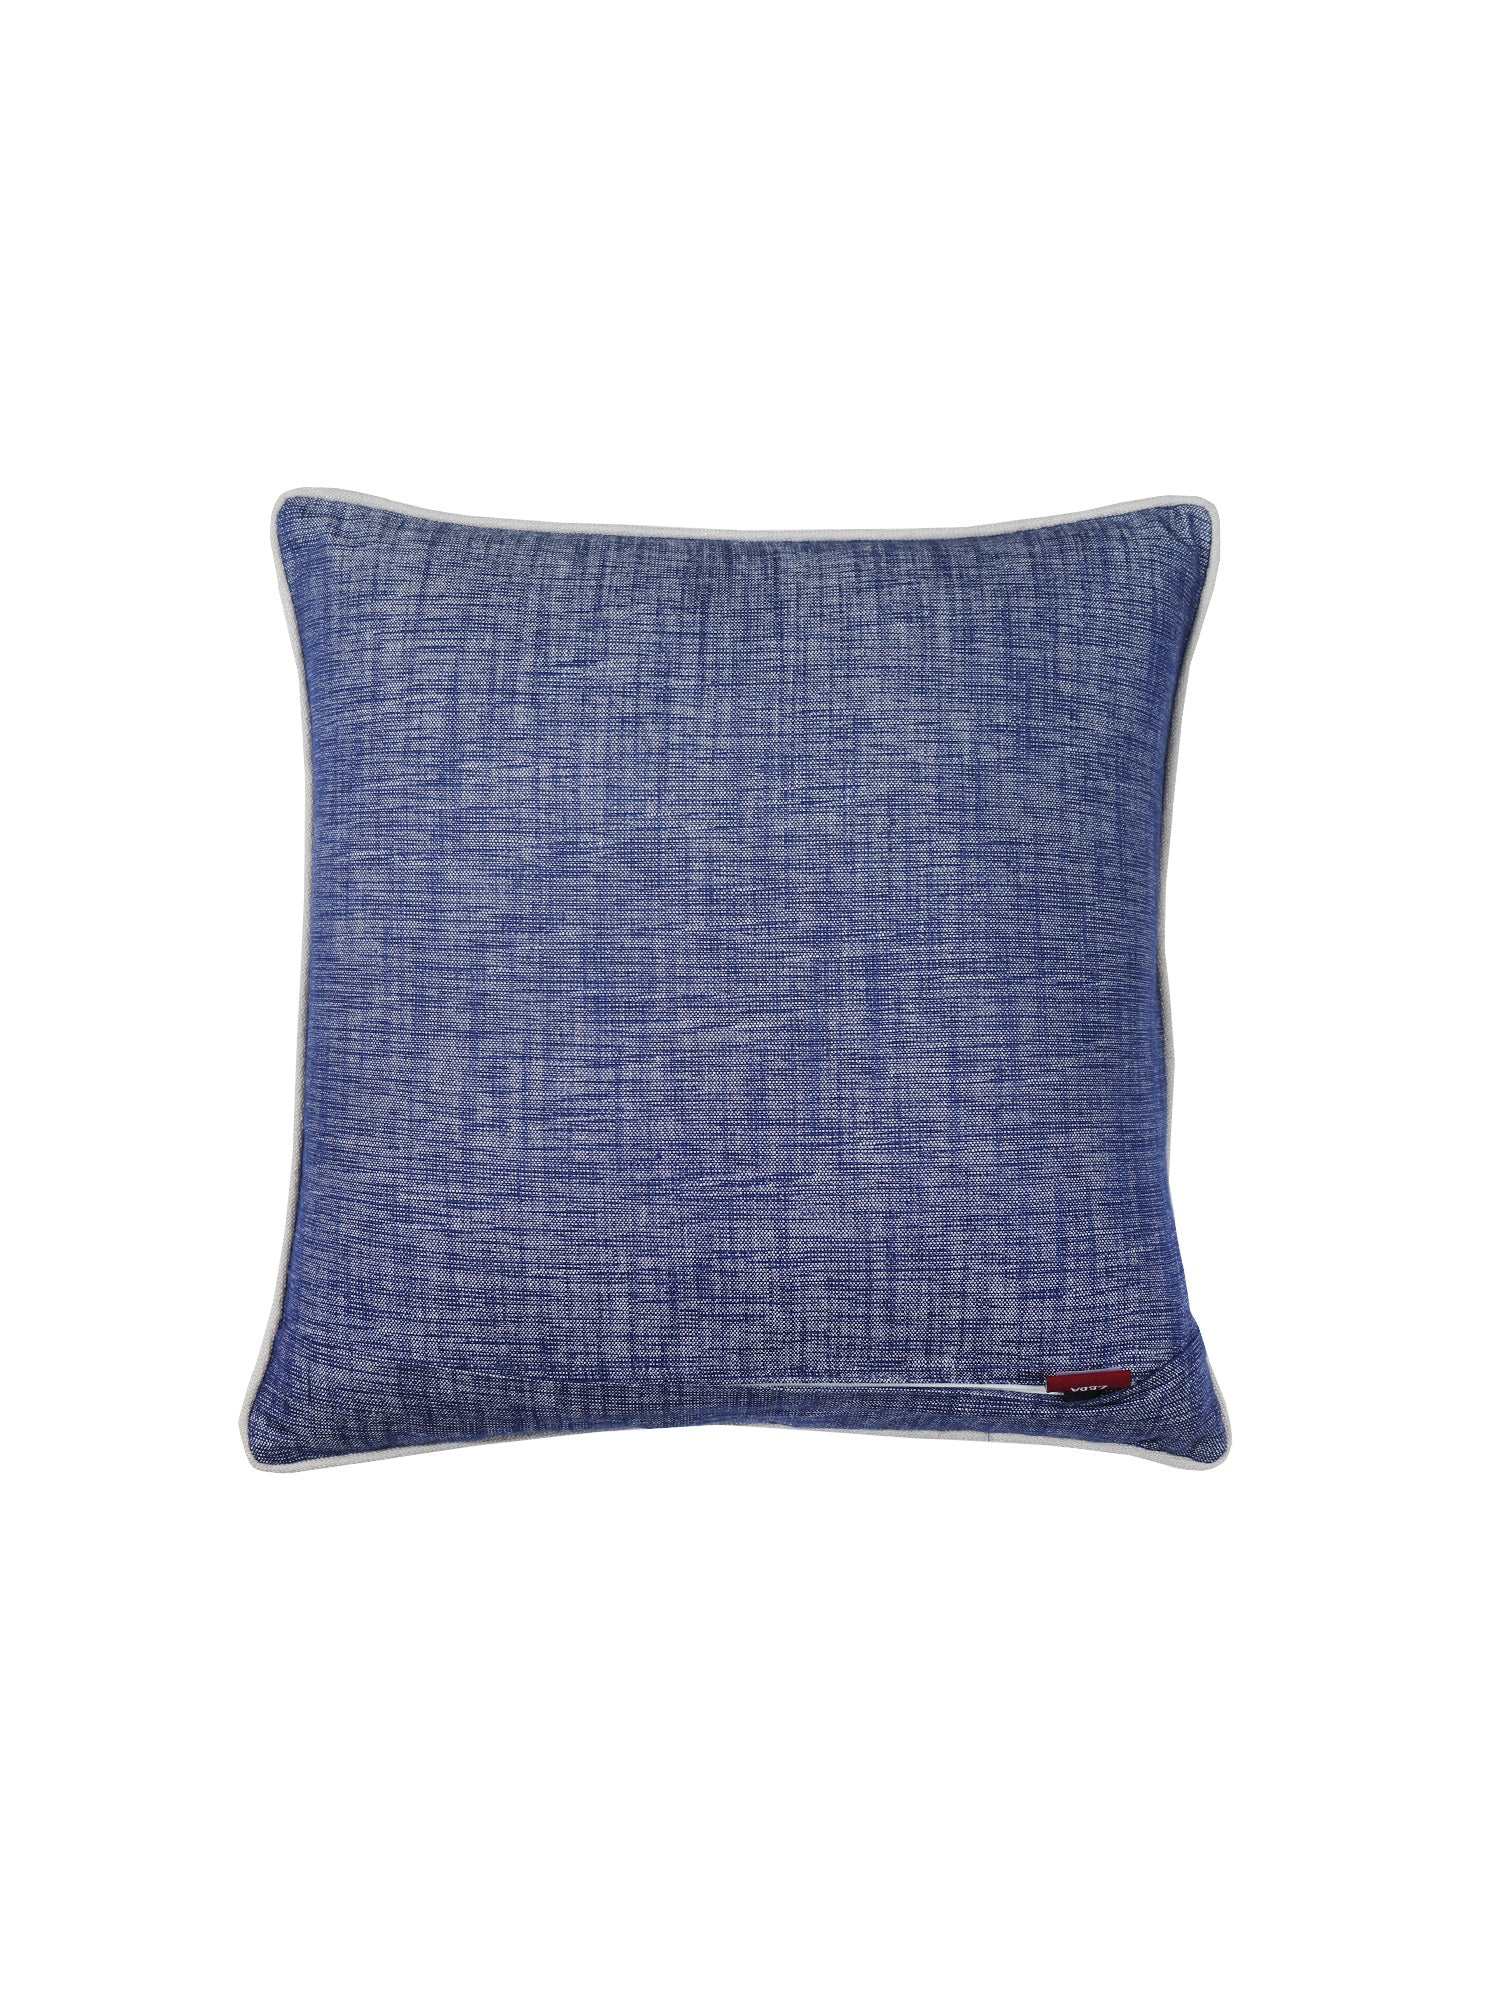 Cushion Cover for Sofa, Bed Cotton Blend with Cord Piping | Blue - 16x16in(40x40cm) (Pack of 1)